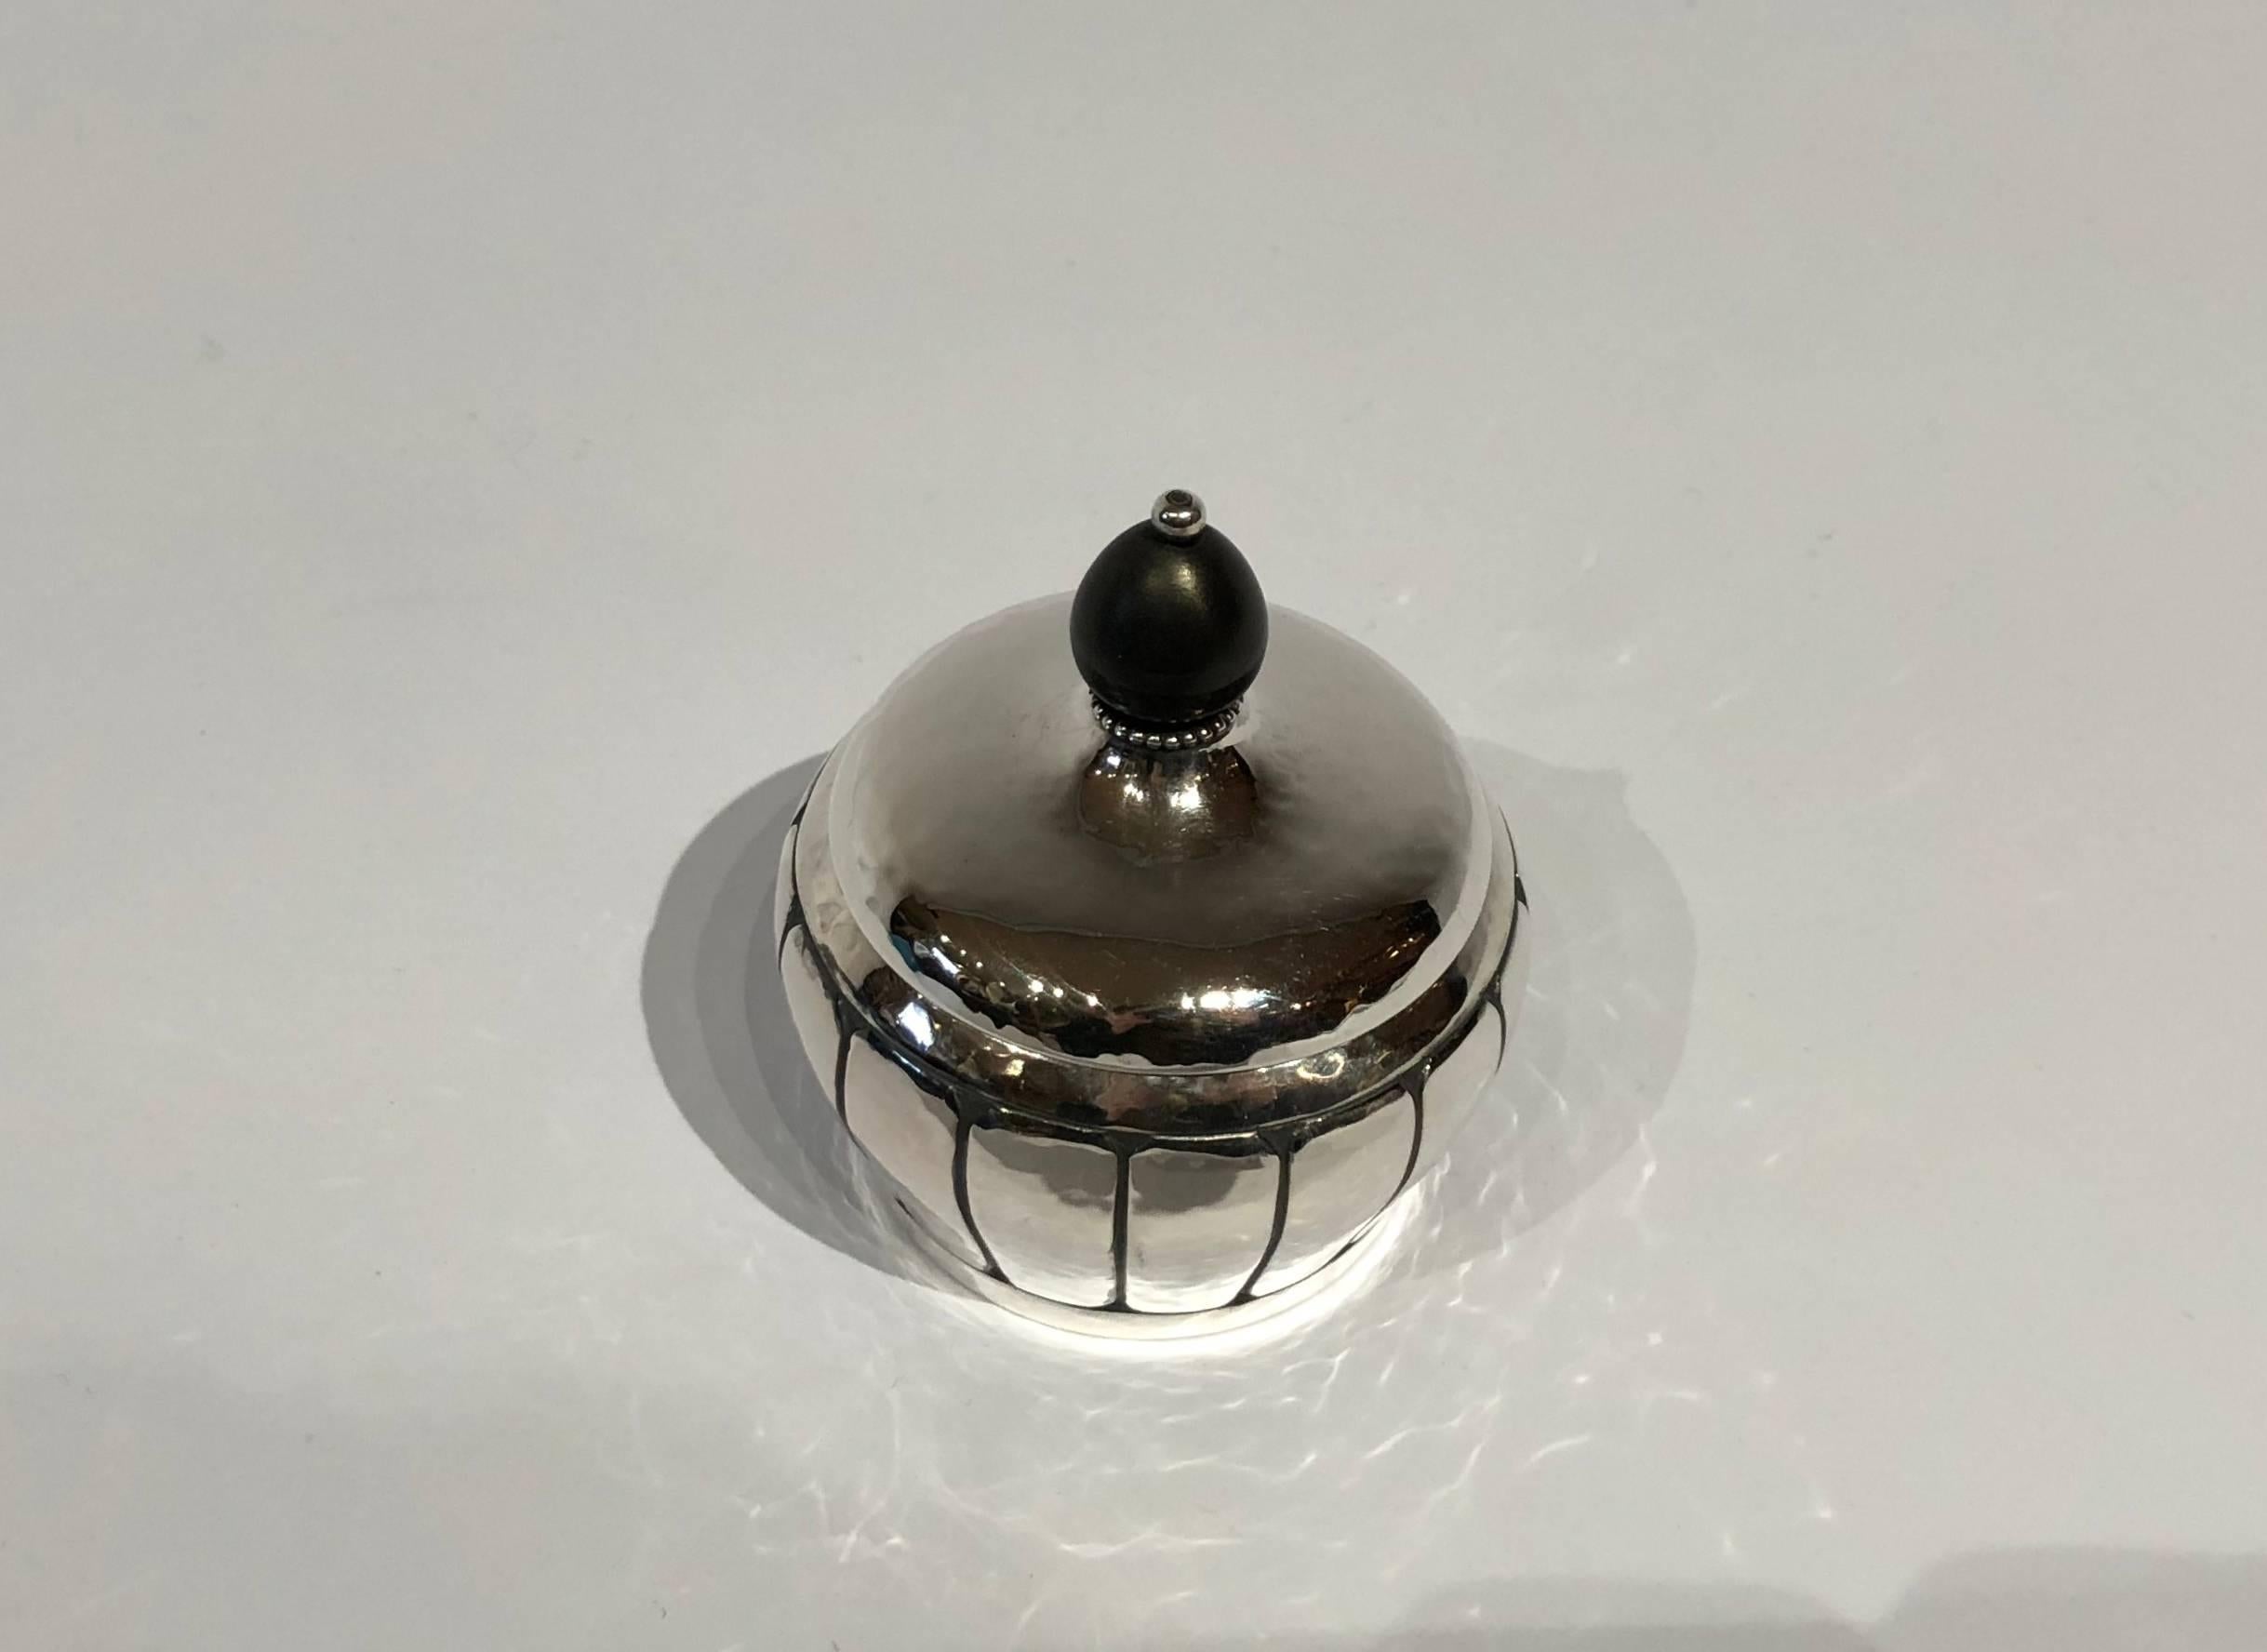 Other Small Sugar Bowl in Hallmarked Silver with Pearl Edge and Ebony Handle